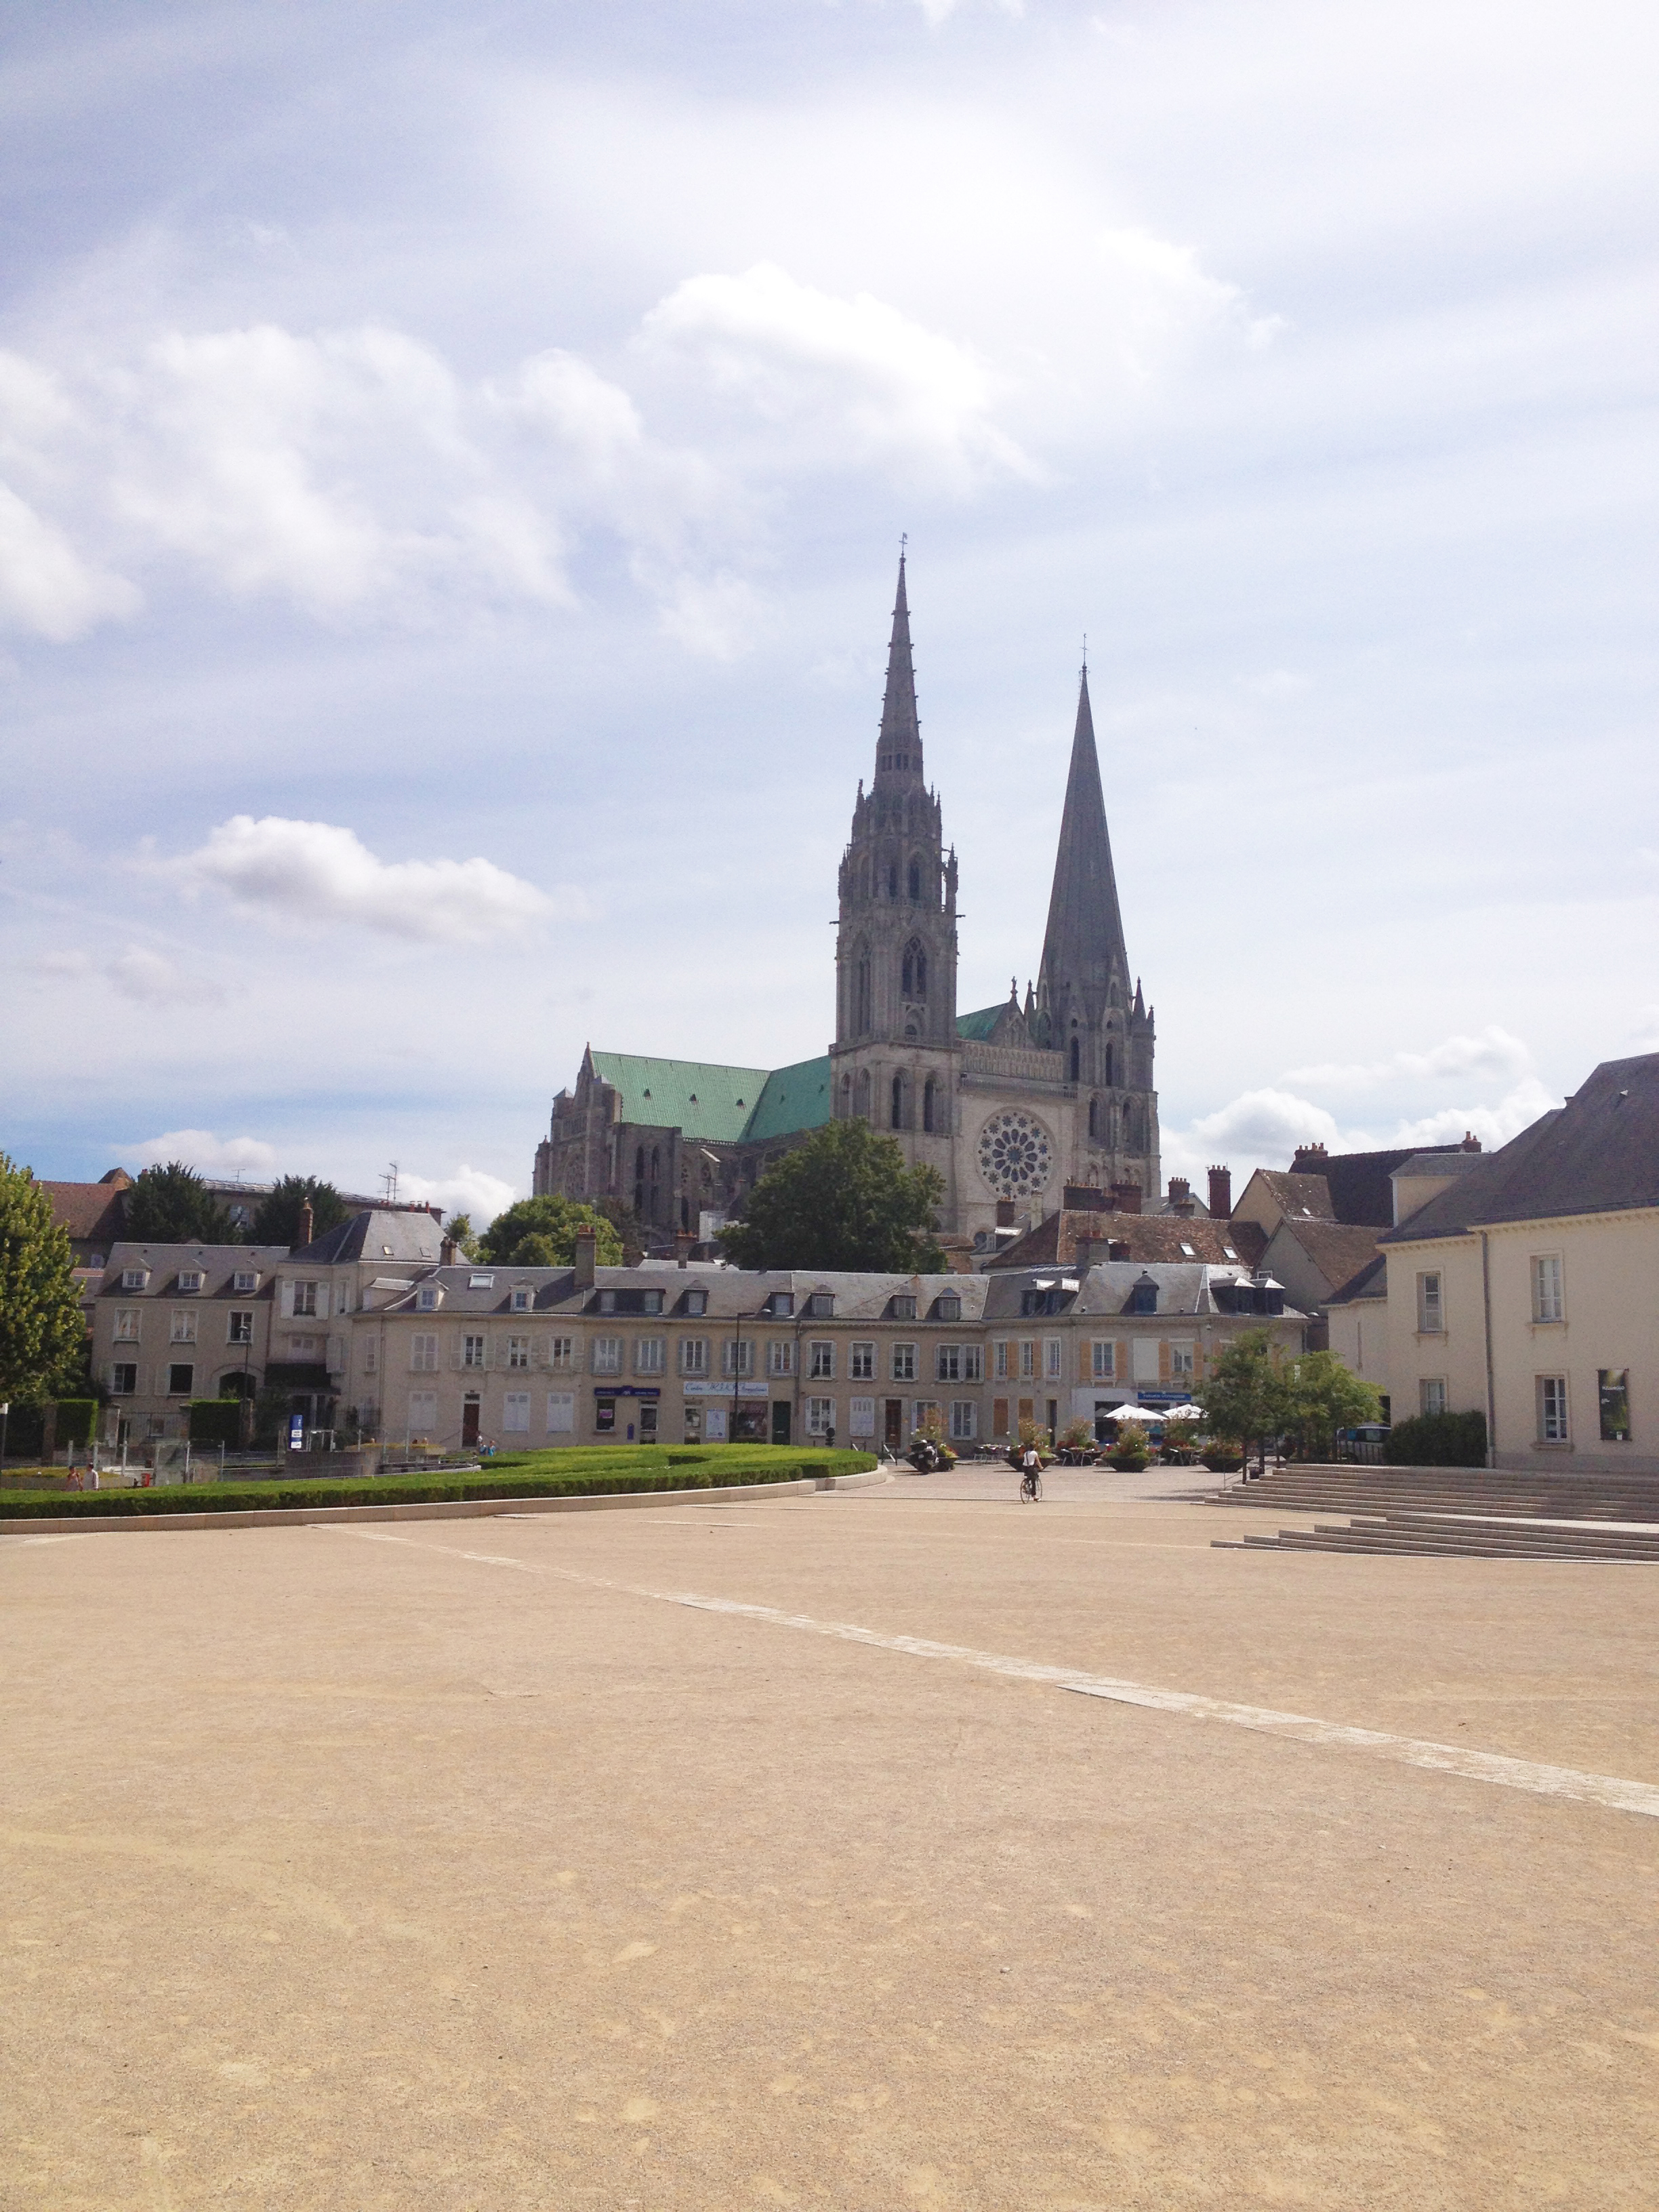  The &nbsp;beautiful little town of Chartres! We were lucky enough to get a tour of the cathedral from Malcolm Miller, who has devoted over 50 years to studying its architecture and stained glass. 